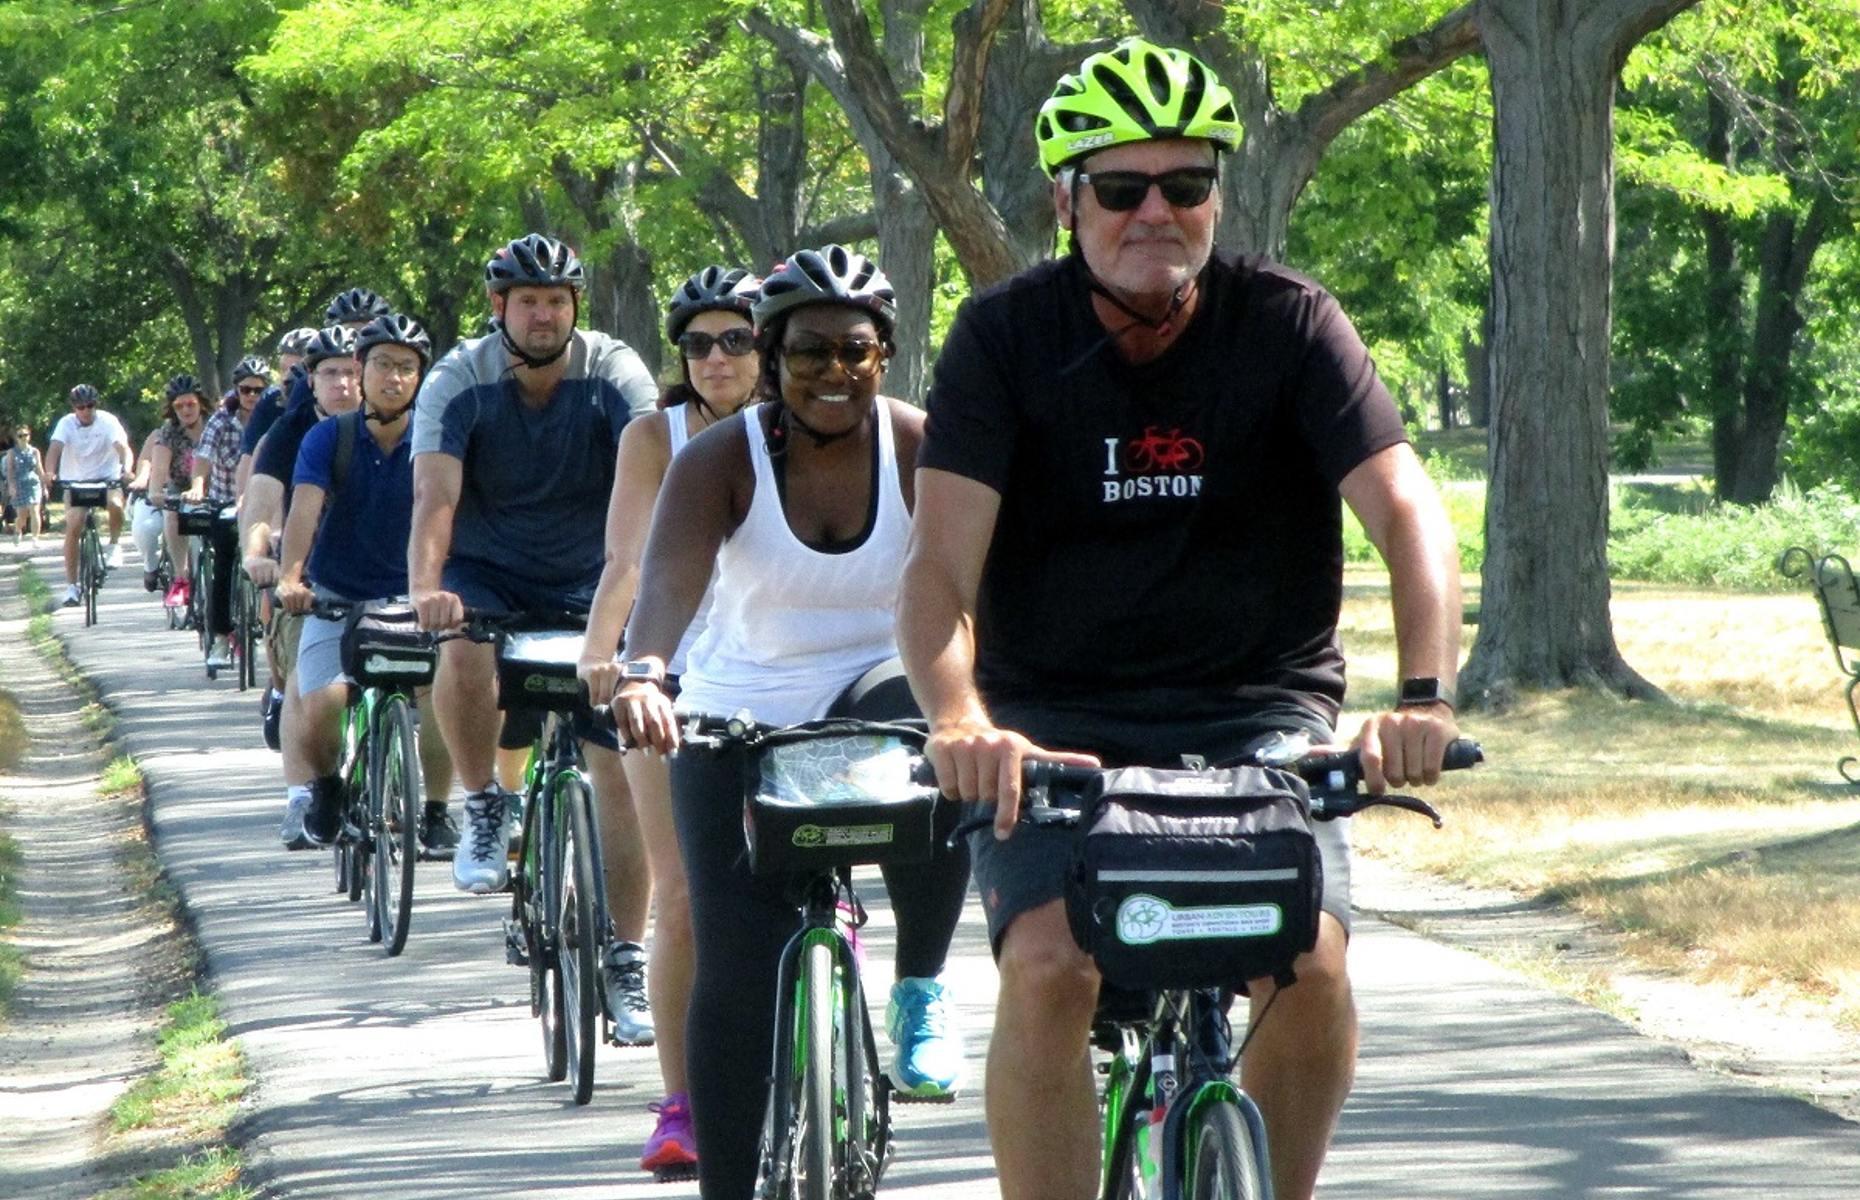 <p>The historic city of Boston can be explored on foot, of course – but a little pedal power will allow you to see many of its most important sights in a shorter amount of time. <a href="https://www.urbanadventours.com/bike-tours/city-view/">Urban AdvenTours’ flagship e-bike tour</a>, which takes around two and a half to three hours, takes you through Fenway Park, Boston University Campus, Boston Common and past plenty of attractive brownstones.</p>